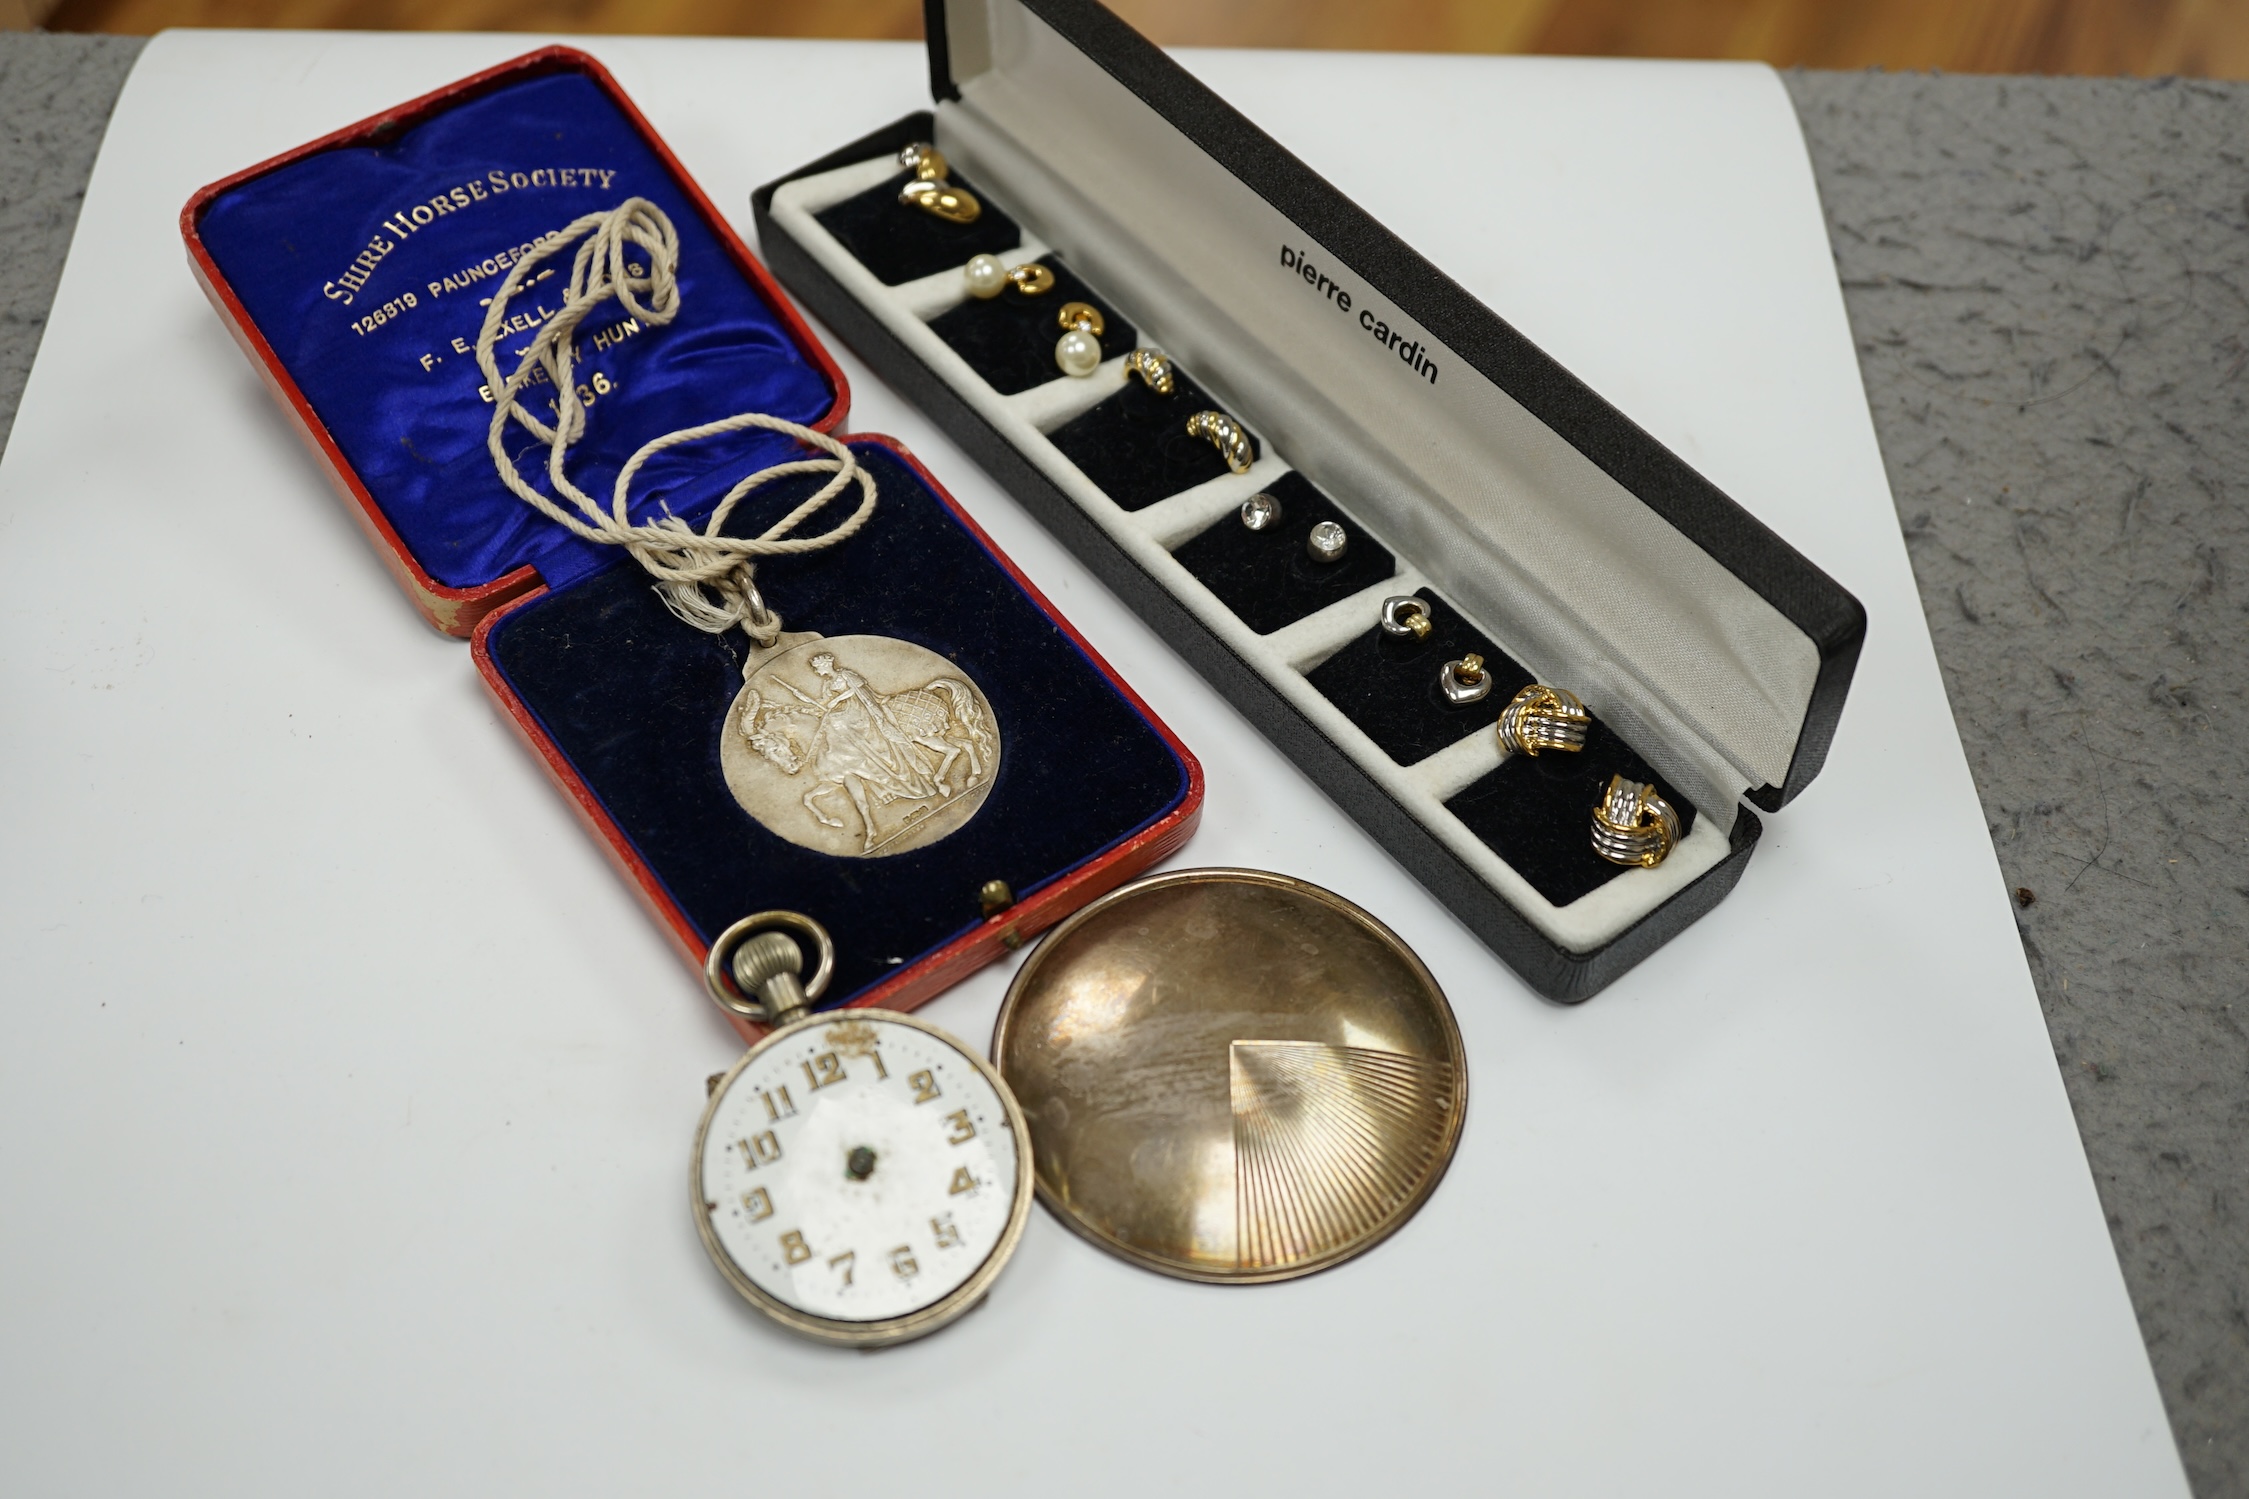 A late Victorian silver oval locket on a white metal chain and other jewellery etc., including three rings, a pocket watch and two modern silver brooches by Clive Edward Burr, largest 75mm. Condition - varies, poor to fa